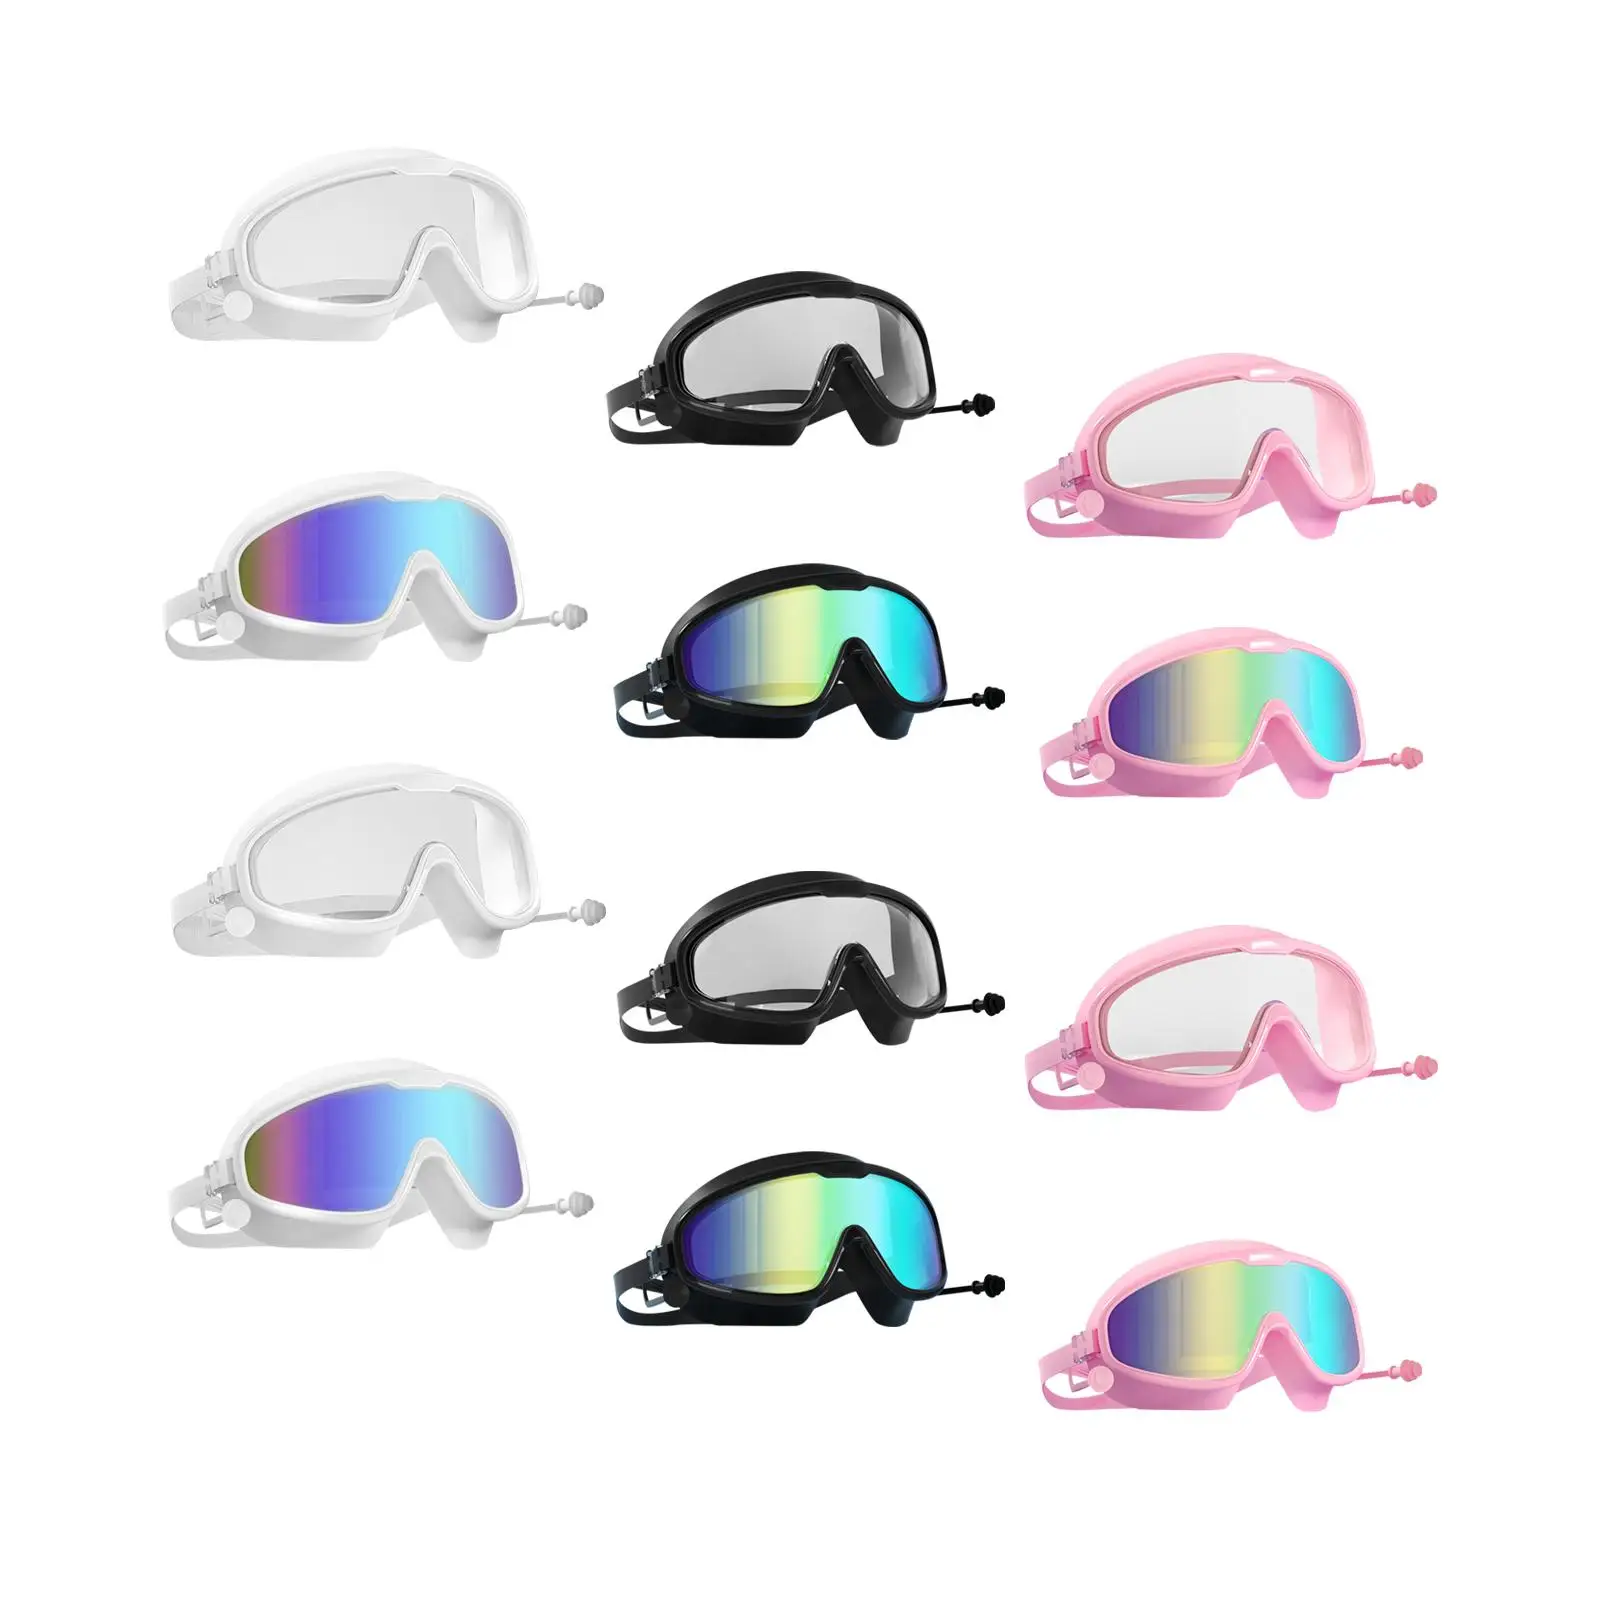 Swimming Goggles Swim Glasses with Ear Comfortable Diving Eyewear